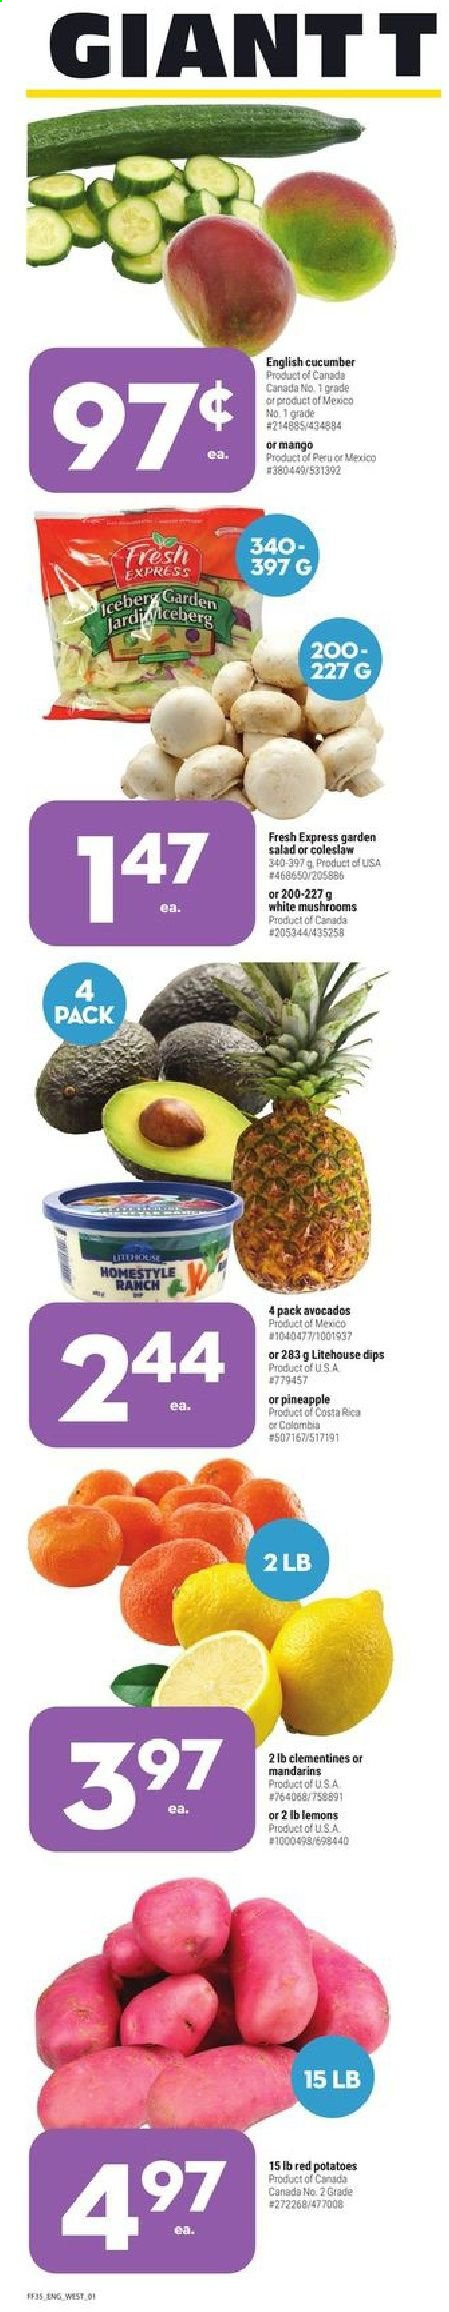 thumbnail - Giant Tiger Flyer - March 31, 2021 - April 06, 2021 - Sales products - mushrooms, potatoes, red potatoes, avocado, clementines, mandarines, lemons, coleslaw. Page 15.